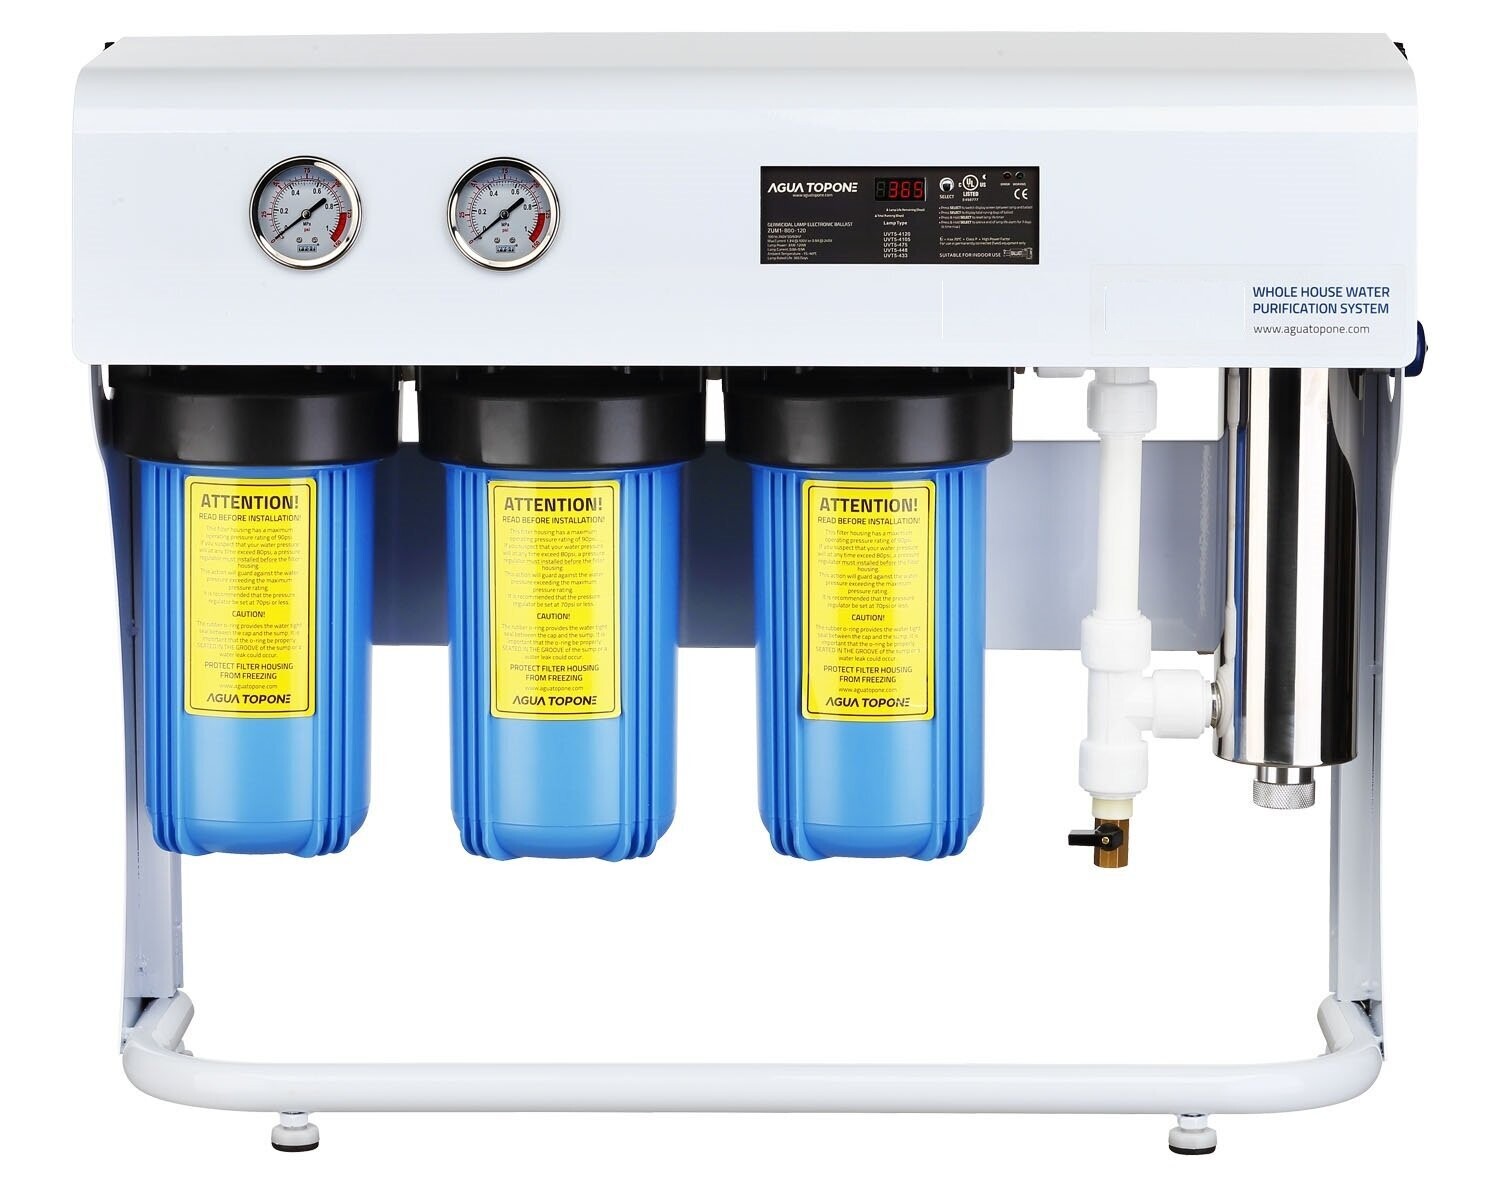 Heavy waterpurification system for very dirty water, cleaning